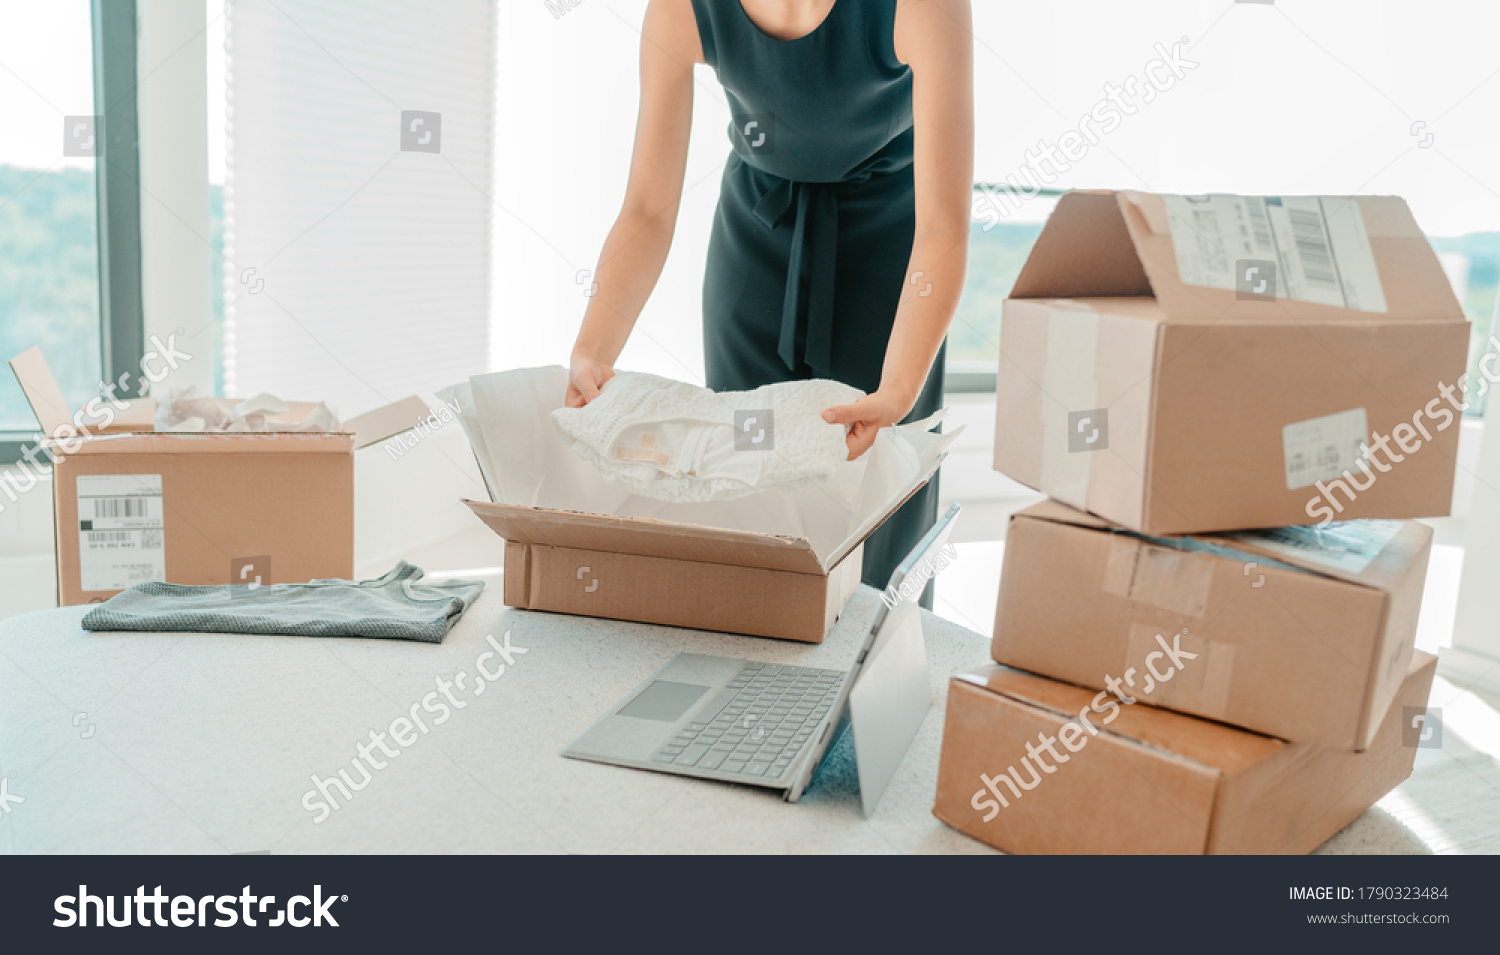 Selling clothing from home. Small business entrepreneur woman packing dress clothes in mailing box for shipping from online store. #1790323484